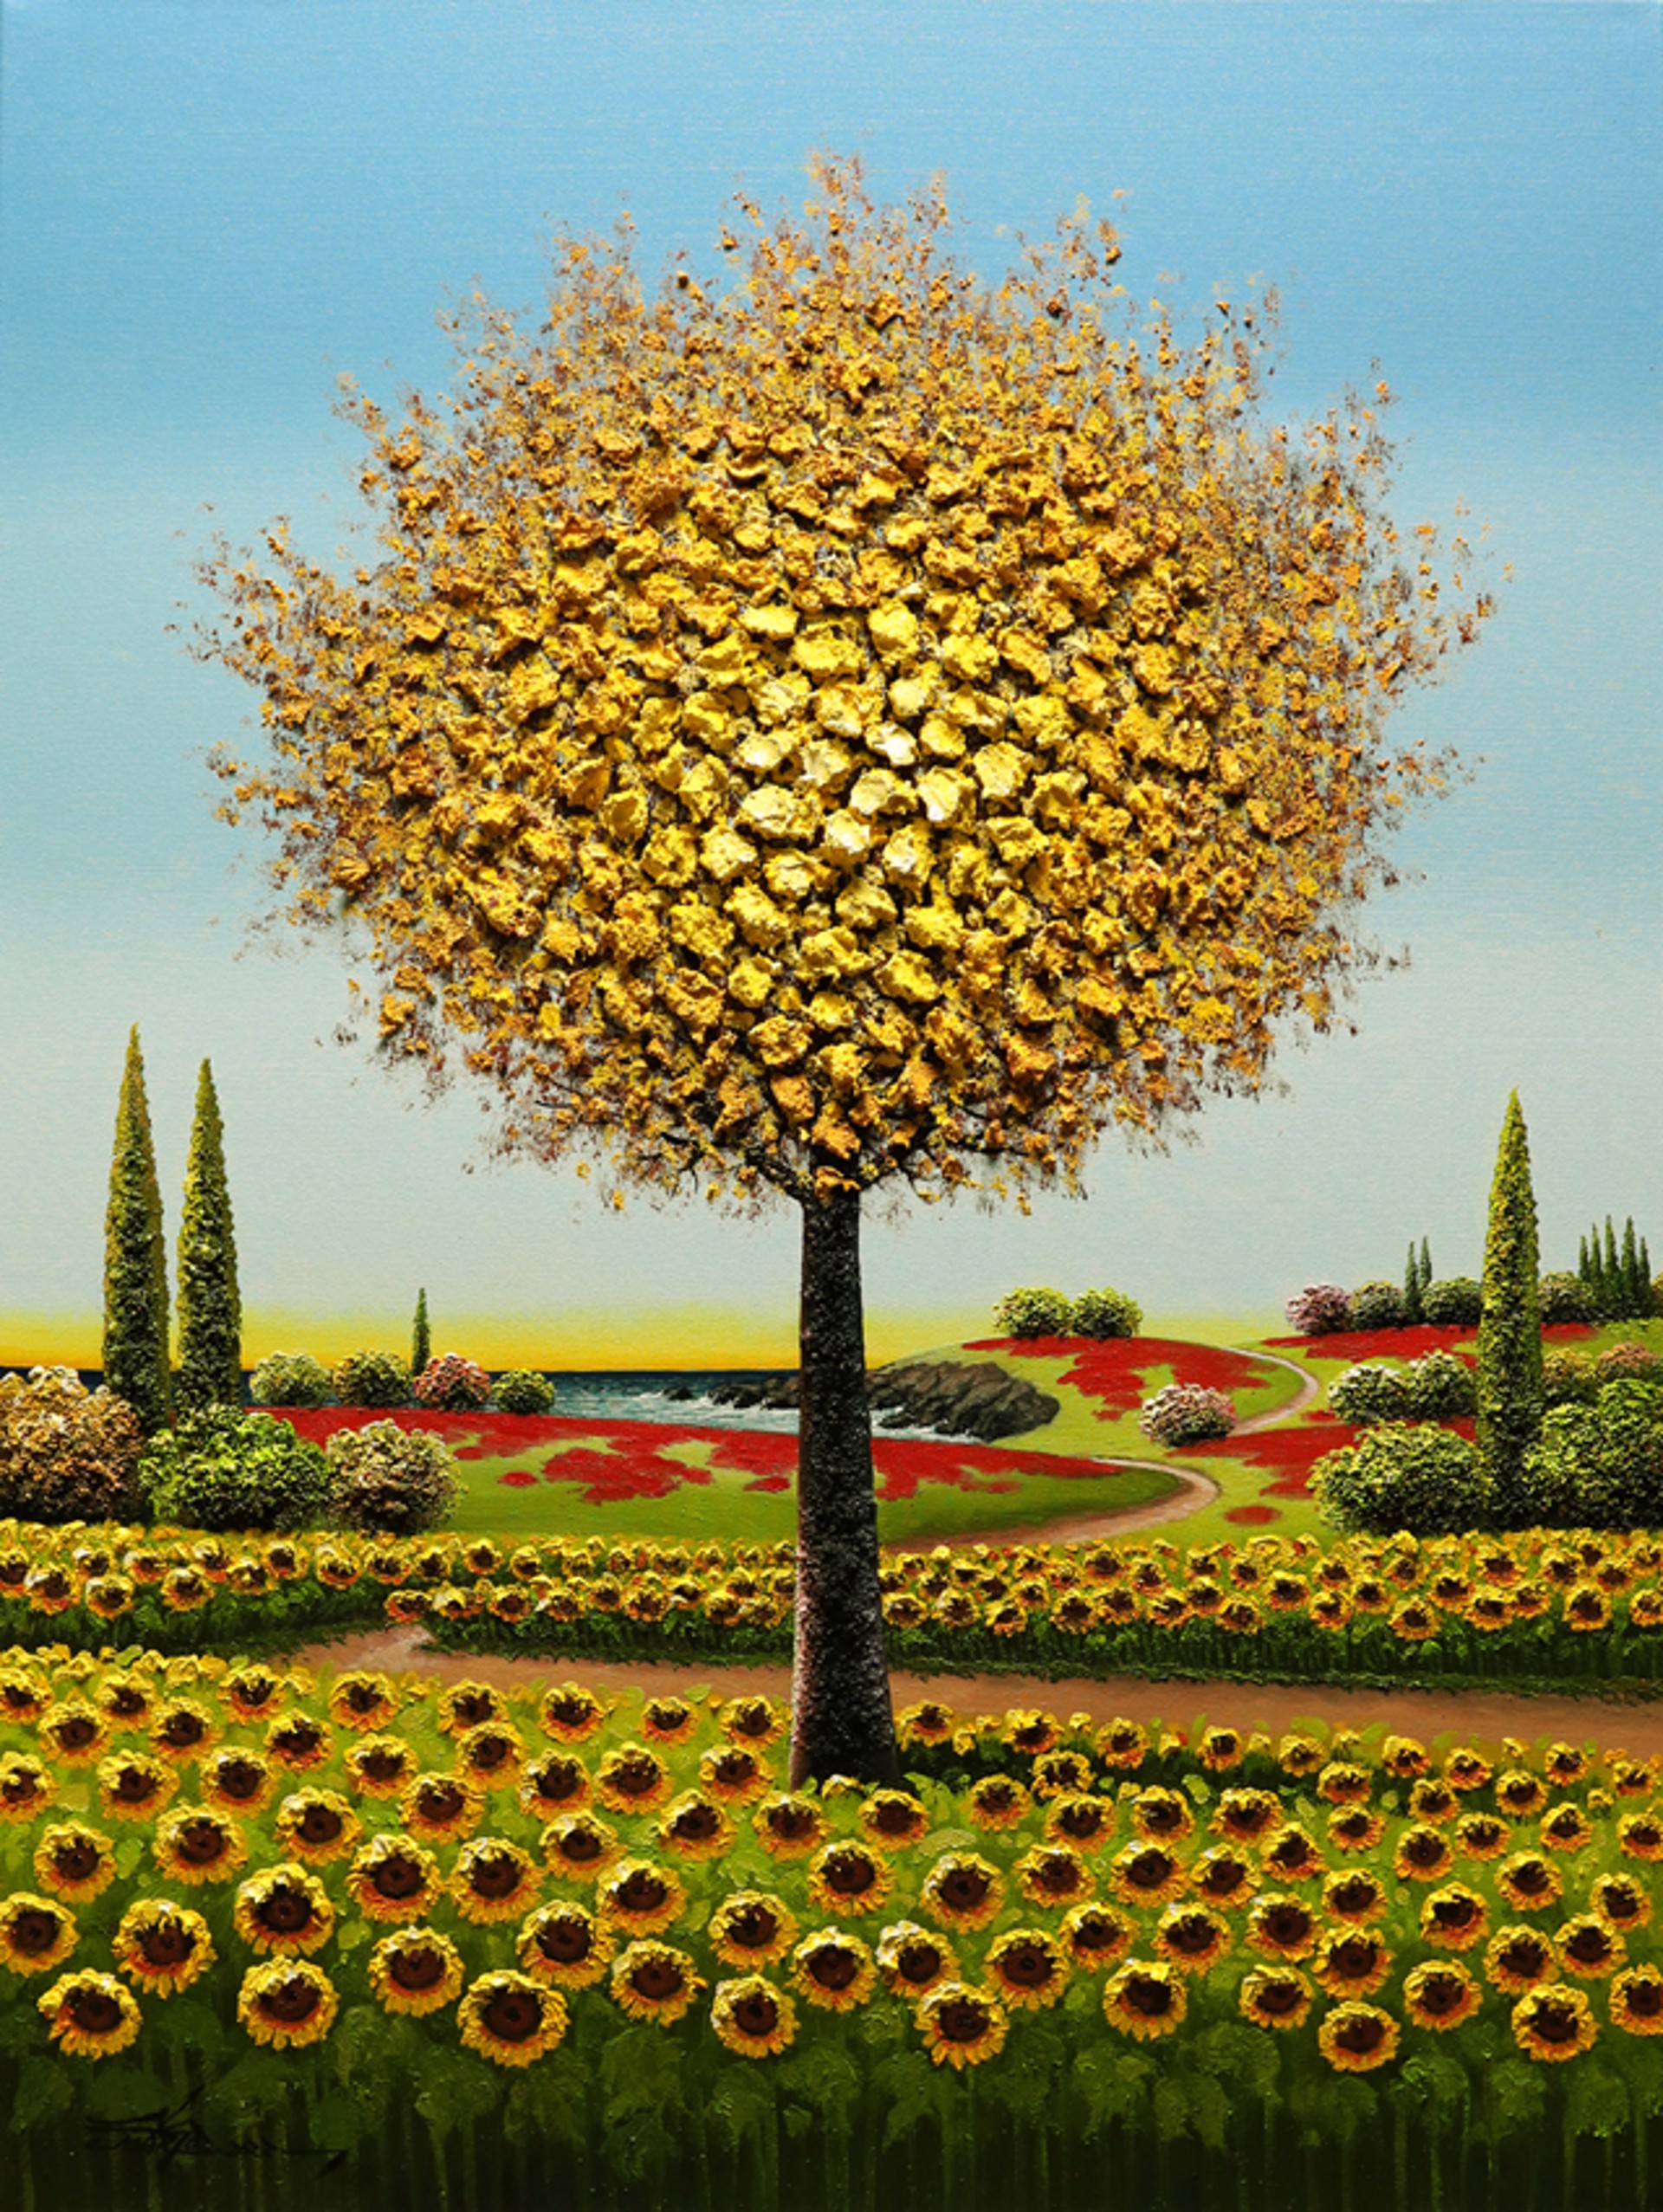 A Mystery Unfolding by painter artist Mario Jung features a thickly textured yellow leaved tree behind a field of sunflowers in front of a serene country side